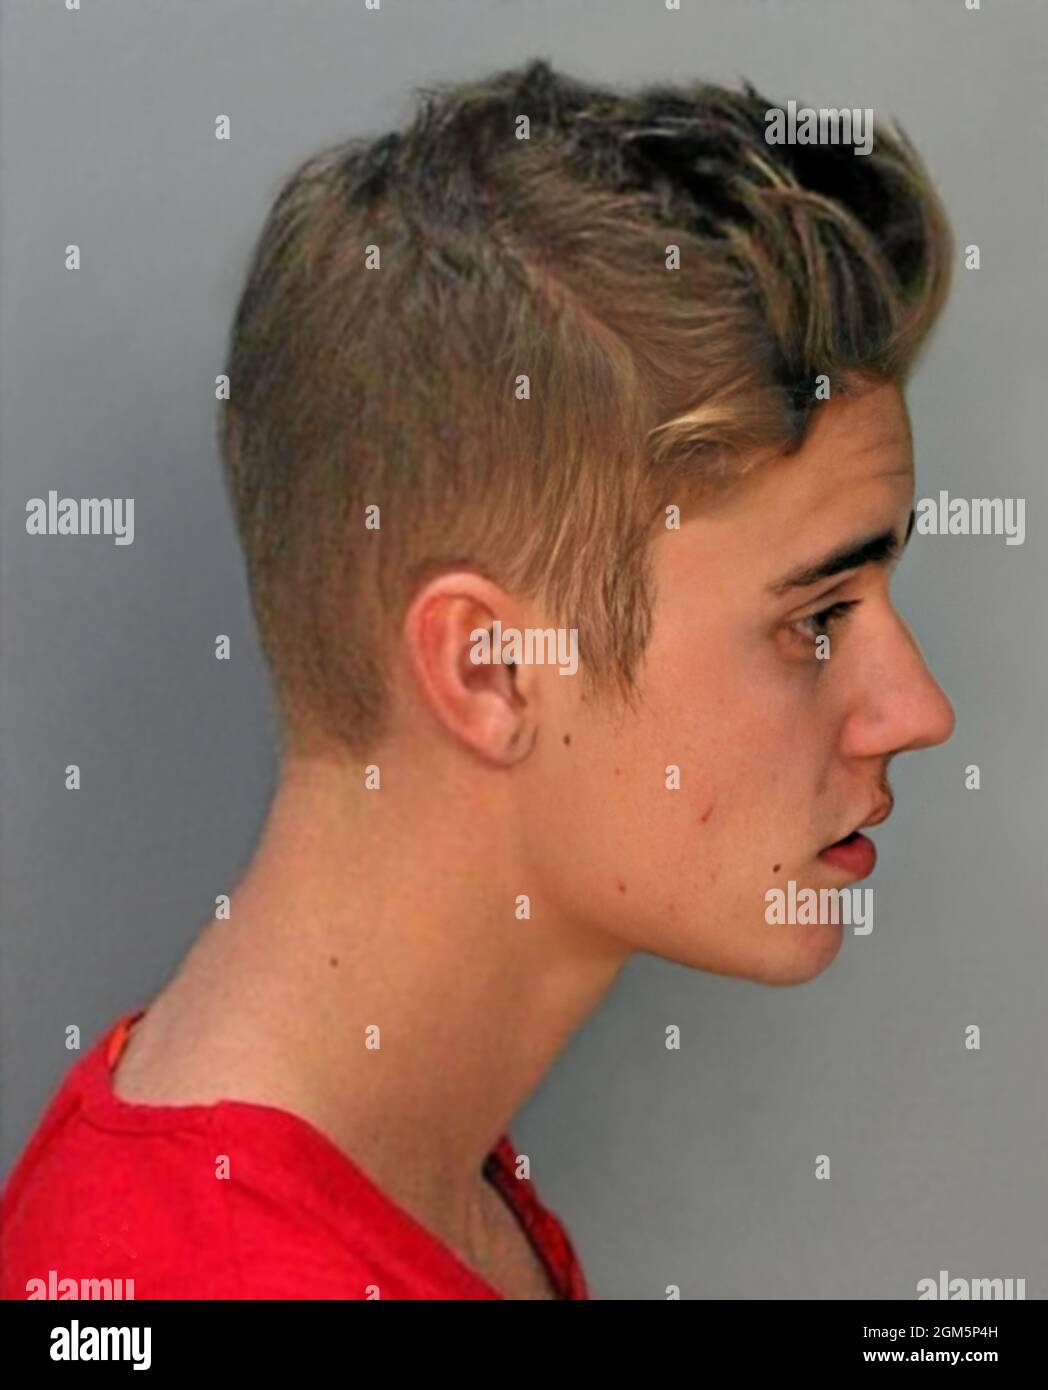 2014, 23 january , MIAMI BEACH , FLORIDA , USA : The celebrated canadian-born Pop Star singer JUSTIN BIEBER ( born 1 march 1994 ) when was arrested by Police Department in the official mugshot by police in Miami Beach, Florida. Bieber was arrested for driving under the influence, resisting arrest and driving without a valid driver's license.  Unknown photographer by Miami Beach Police Department . - Mug sghot - MUG-SHOT - HISTORY - FOTO STORICHE  - MUSIC - MUSICA - cantante - COMPOSITORE - ROCK STAR - ARRESTO - Arrestation - ARRESTATO DALLA POLIZIA - FOTO SEGNALETICA - mugshot - mug shot - reb Stock Photo